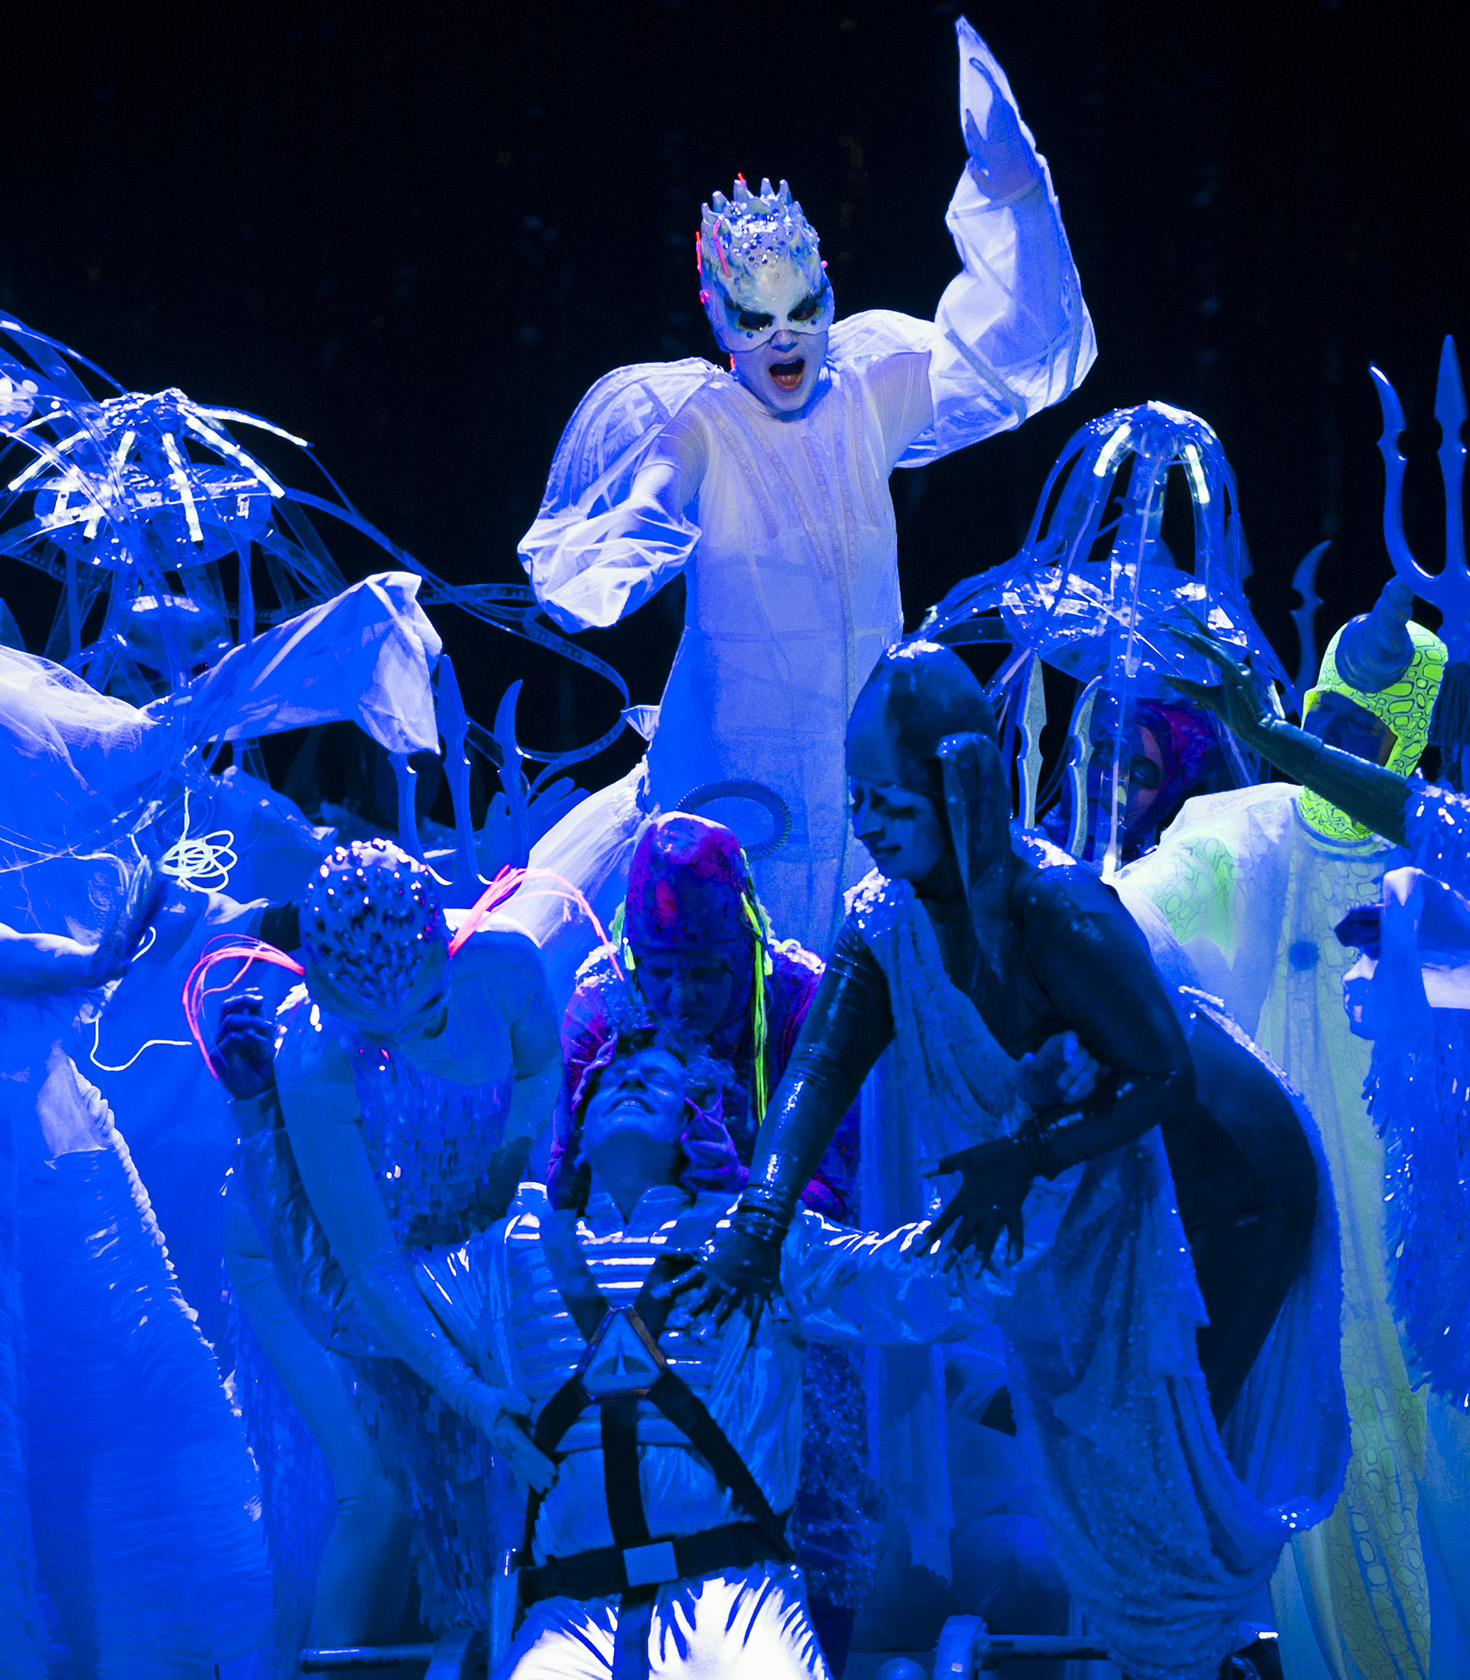 The Magic Flute is back at the Oslo Opera House